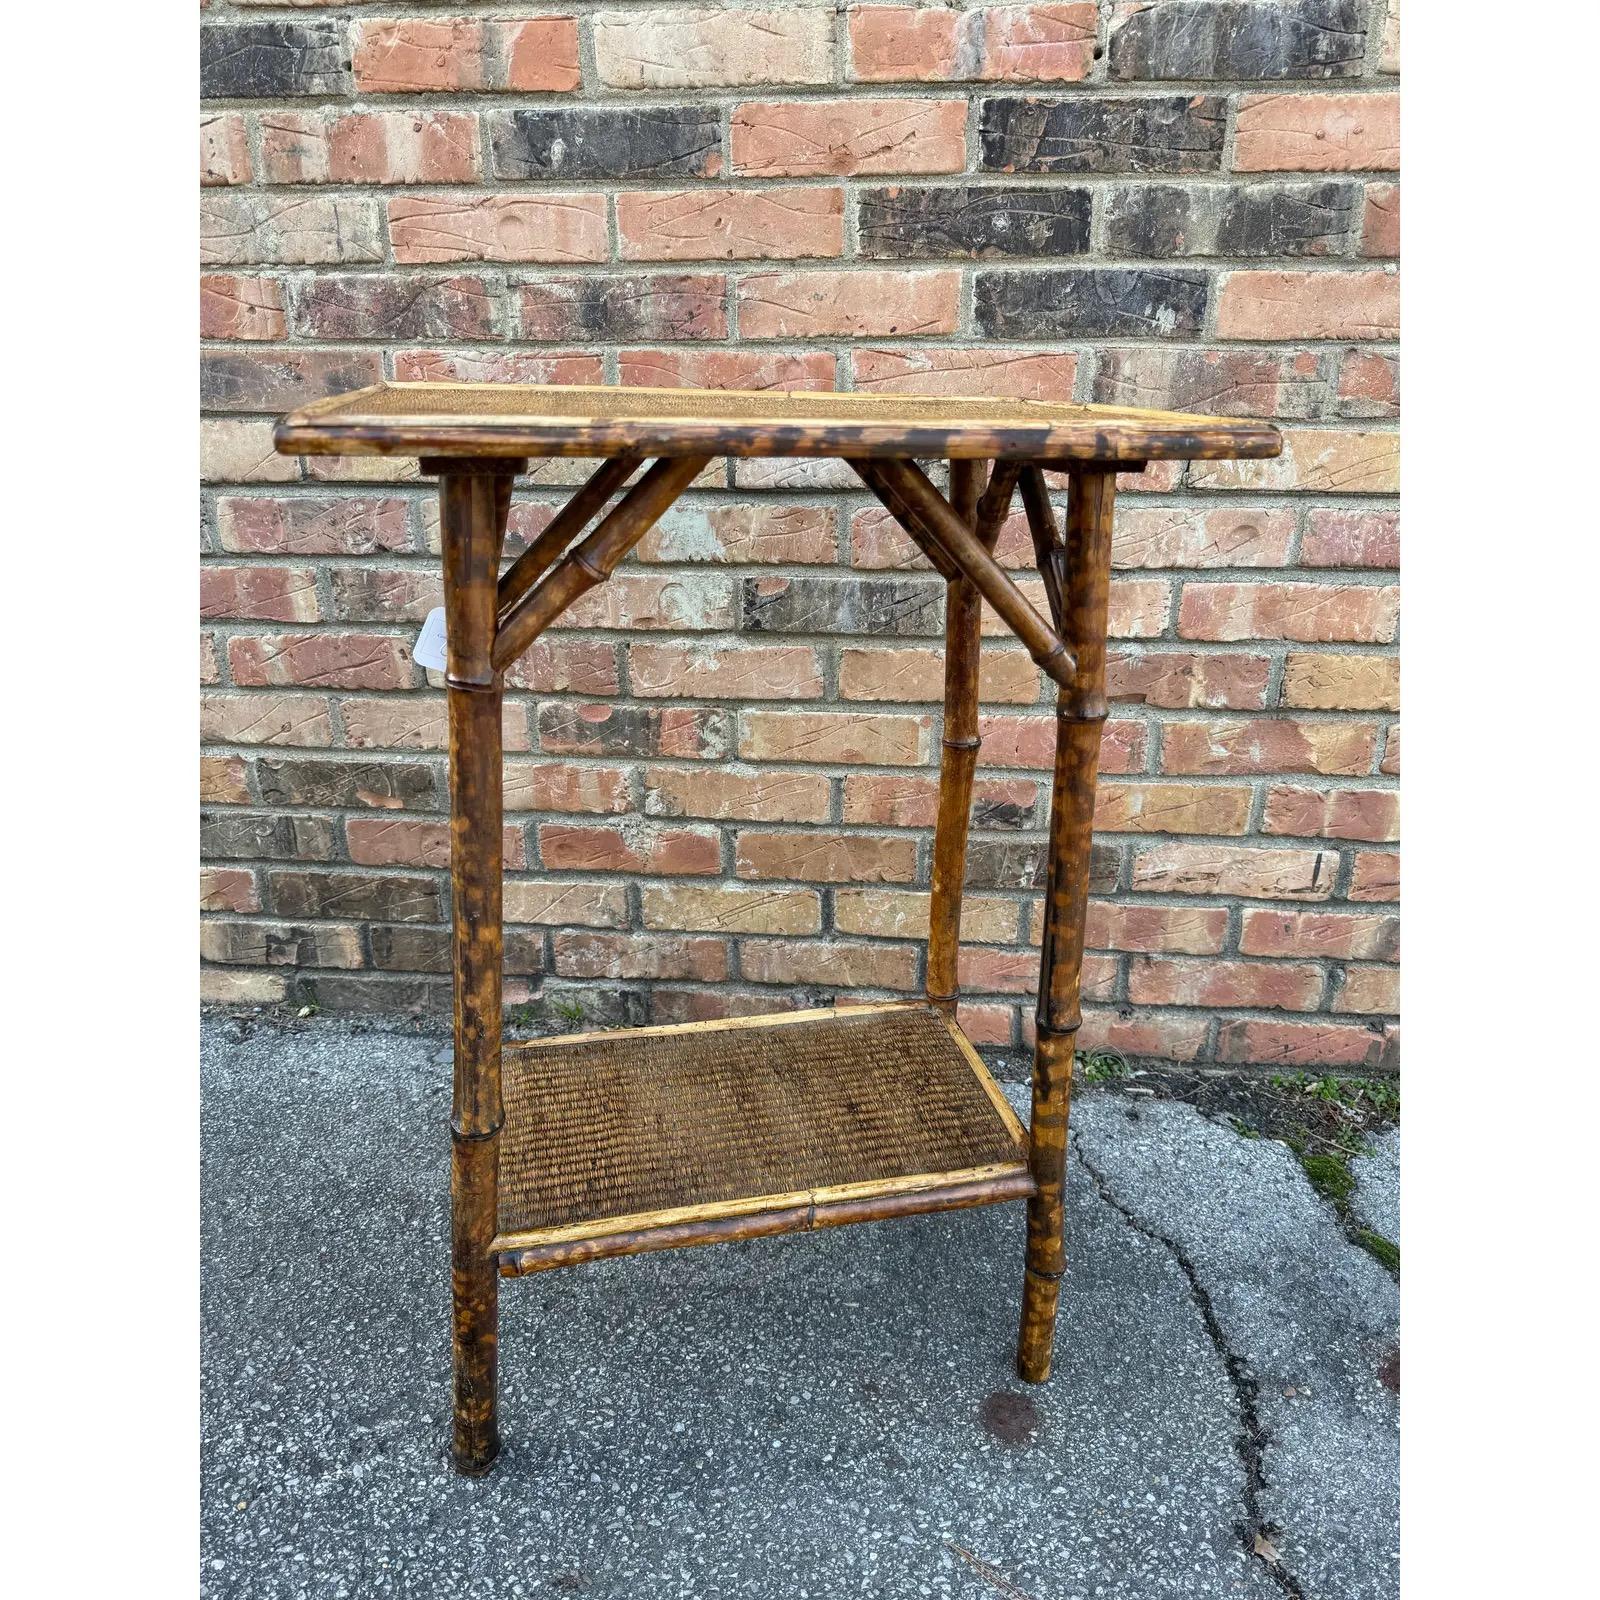 This is a beautiful all original 19th century English bamboo side table! Tables like these make excellent accent pieces because their color and style is so versatile. The dark hues of the burnt bamboo pair perfectly with the lighter golden of the